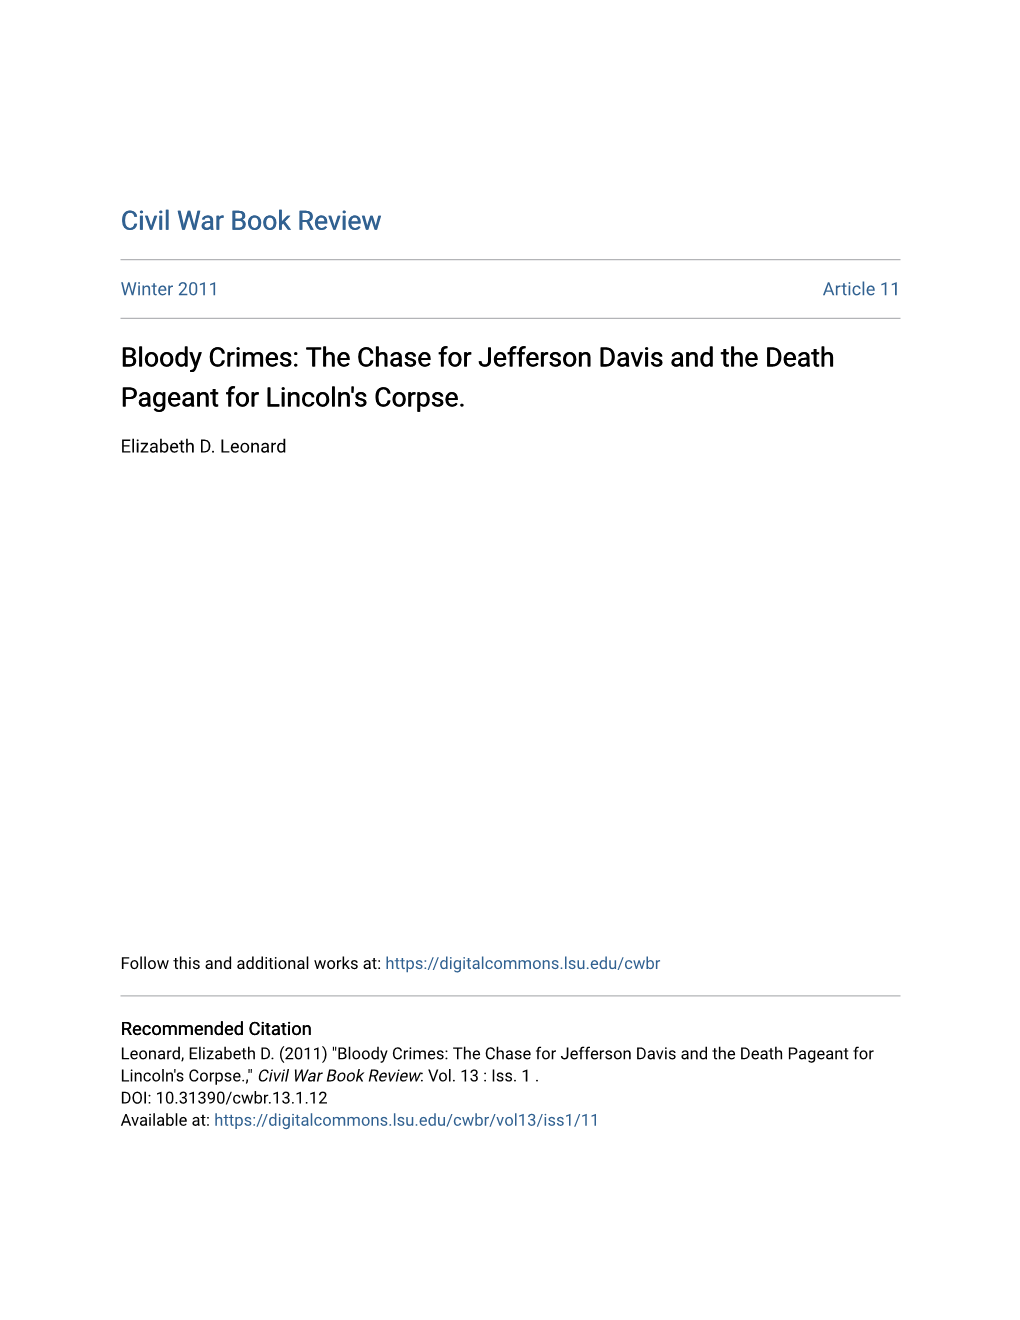 The Chase for Jefferson Davis and the Death Pageant for Lincoln's Corpse